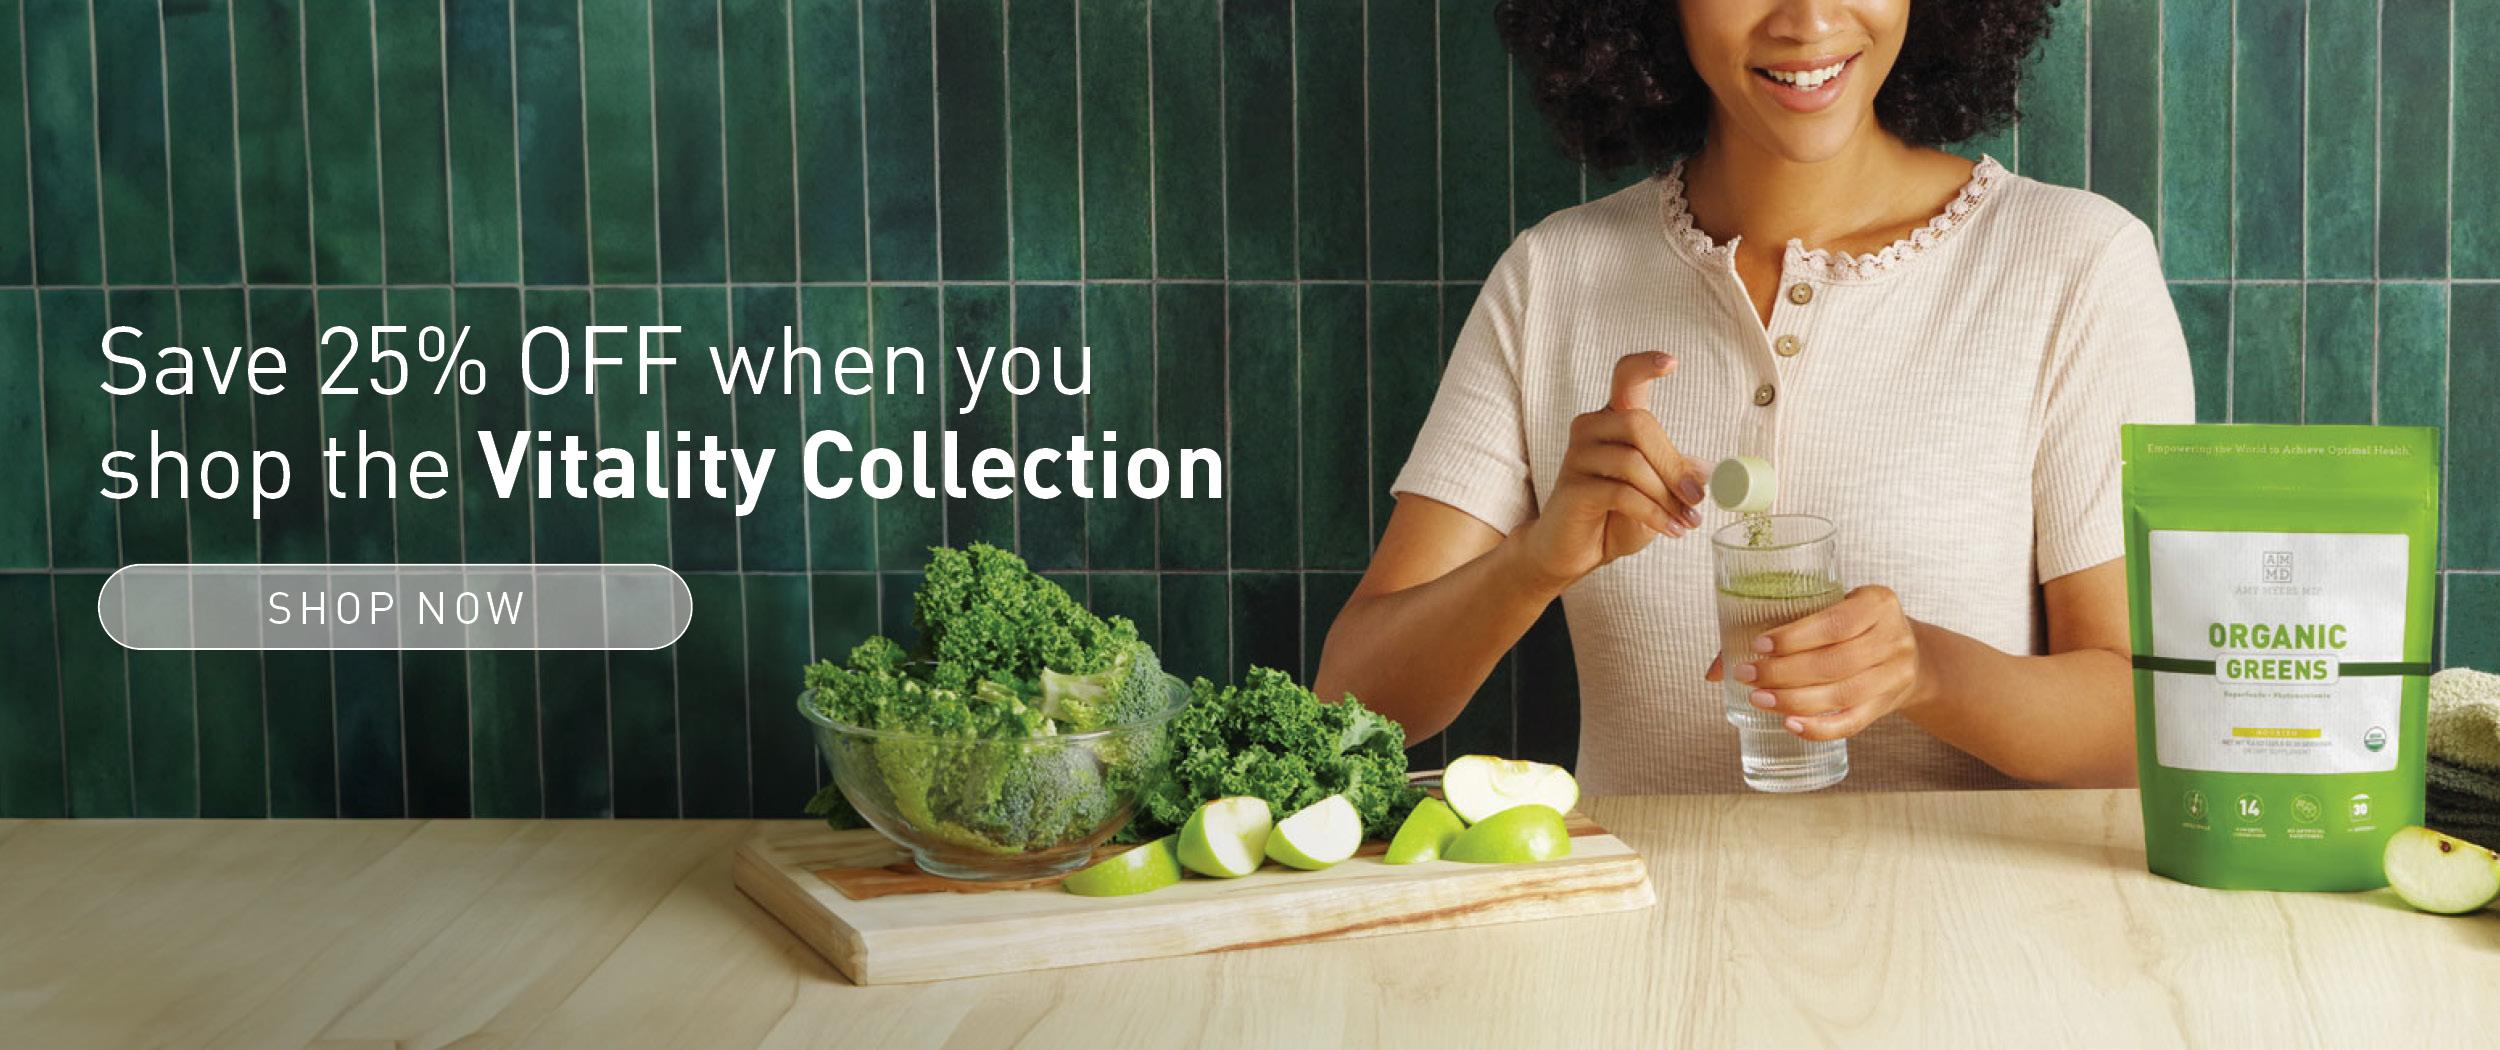 Save 25% OFF when you shop the Vitality Collection. Shop Now.